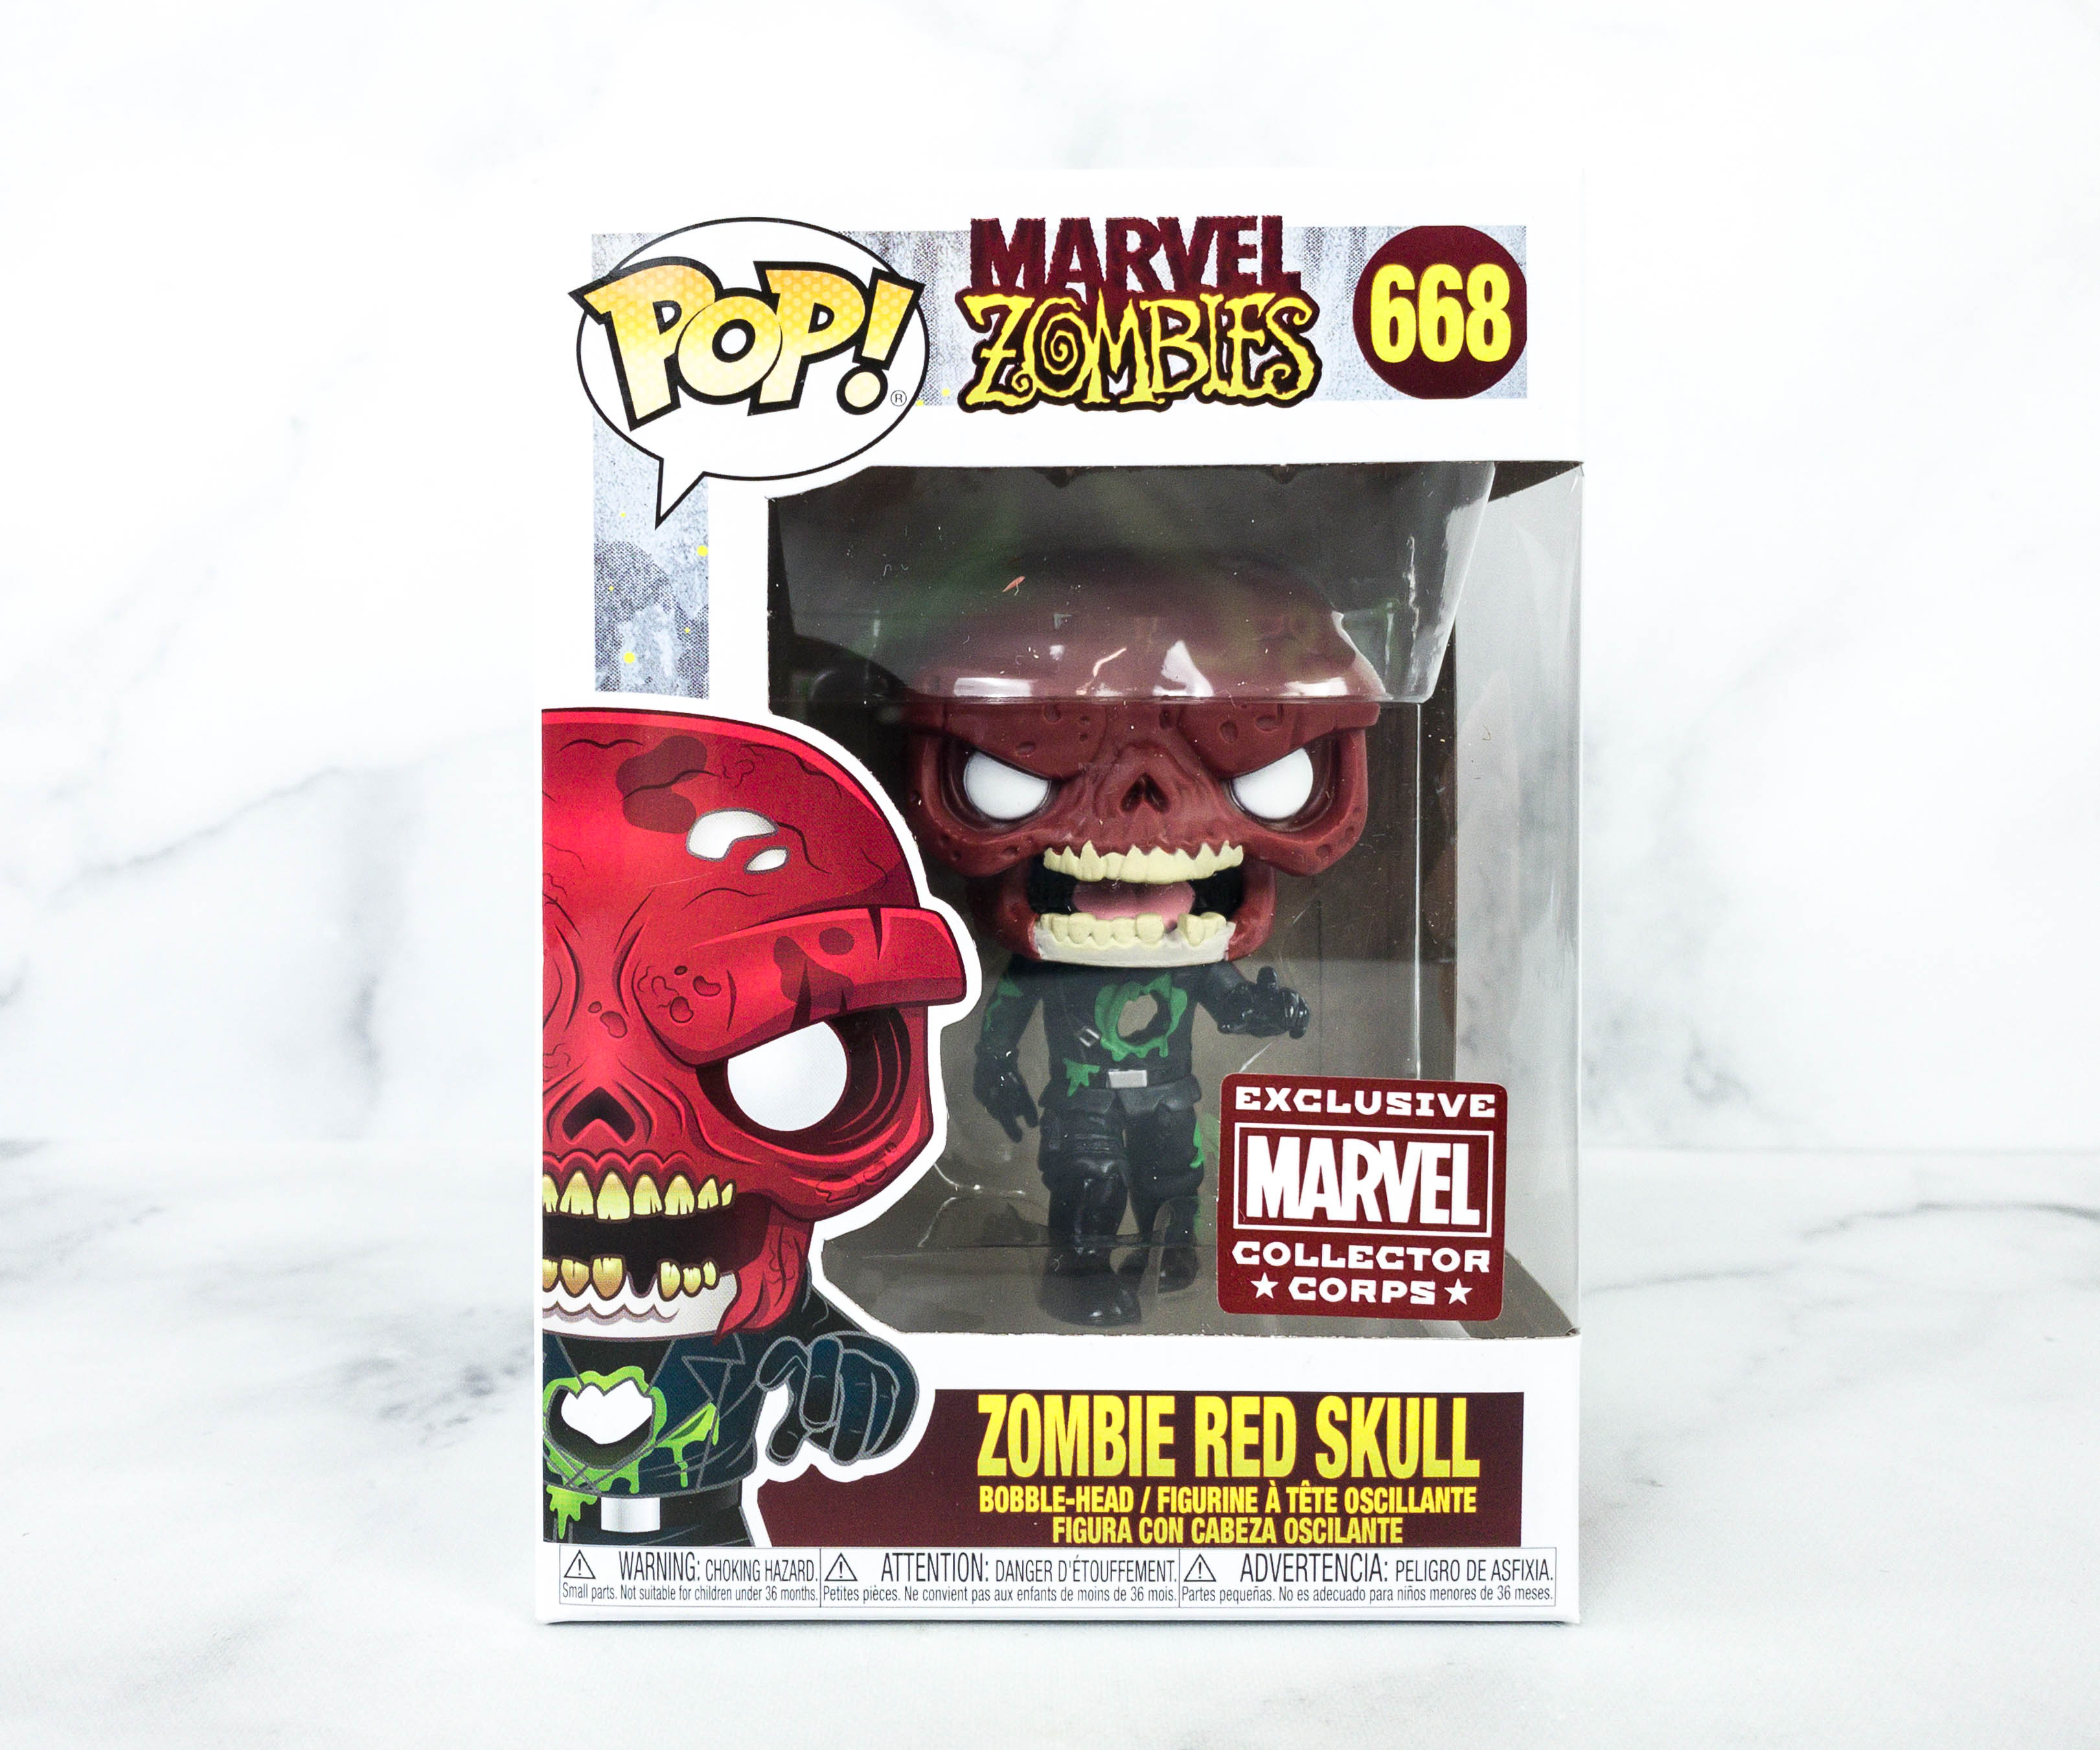 Funko Pop! Marvel Zombies Deadpool with Headpool Collector Corps Exclusive  Figure #667 - US